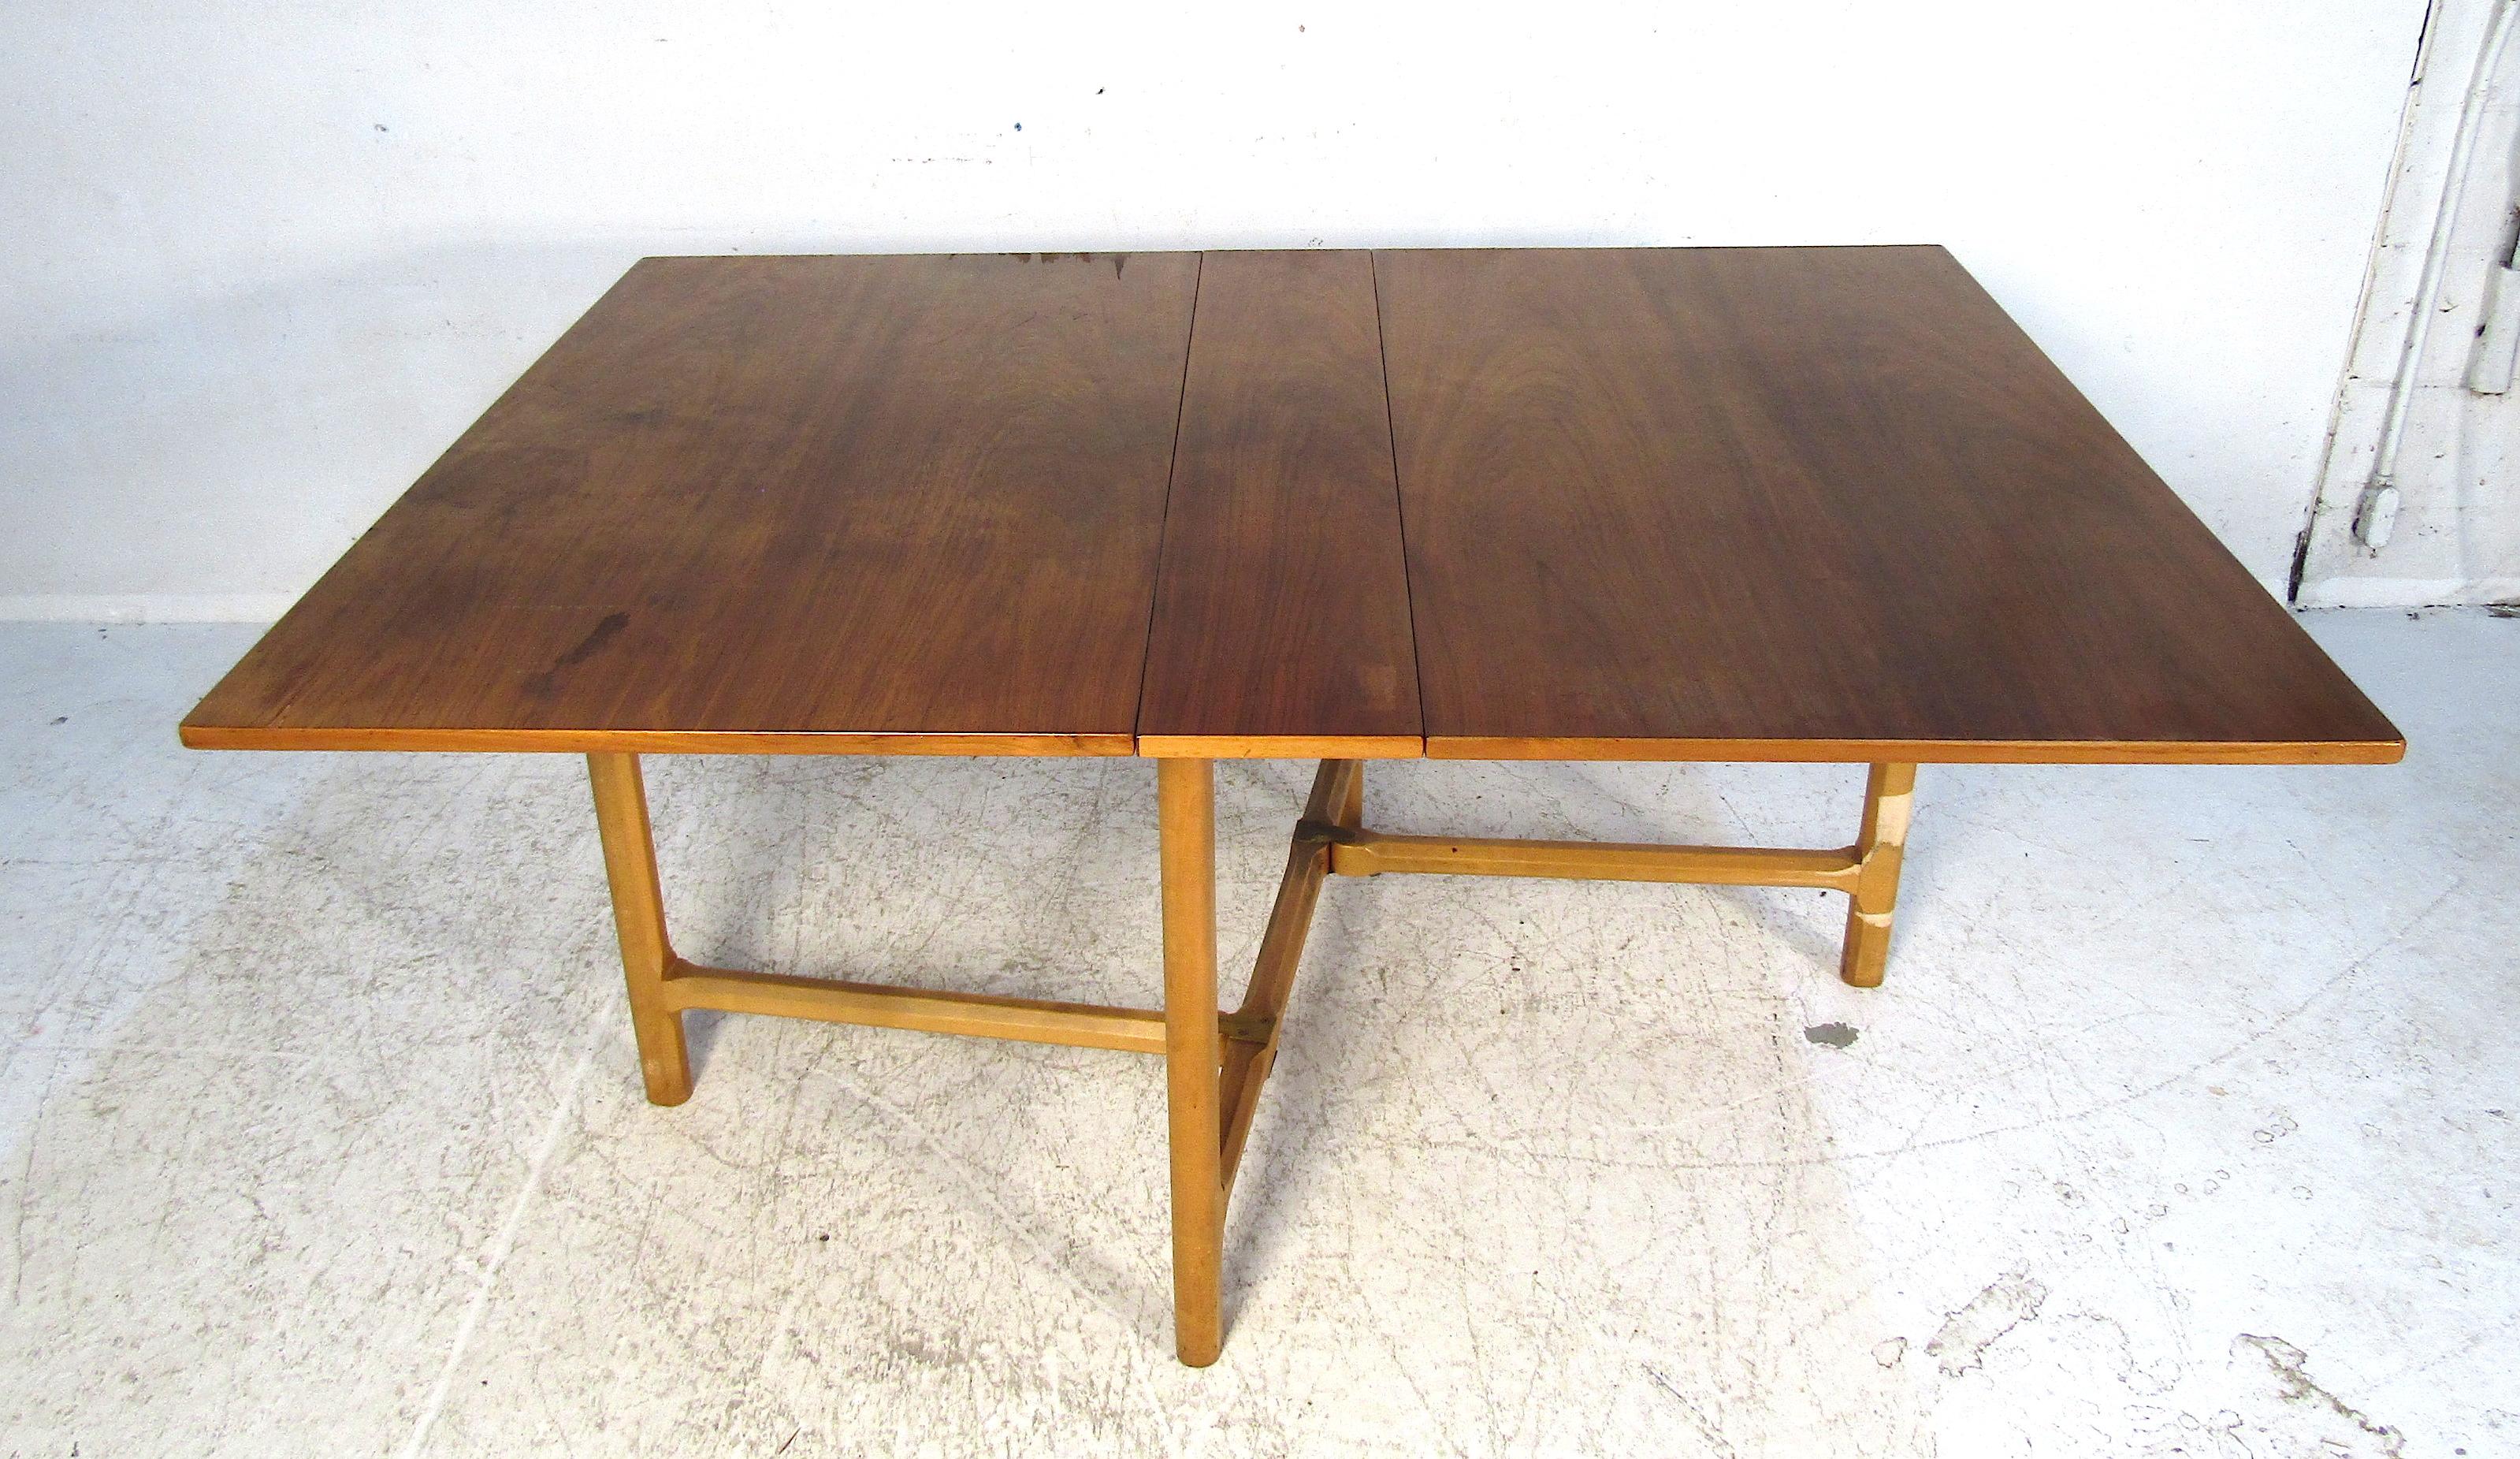 This elegant midcentury drop-leaf table is both functional and beautiful. Able to be stored in almost any spot of the house this table is perfect for smaller apartments or homes while still allowing for a larger dining experience when needed. Please